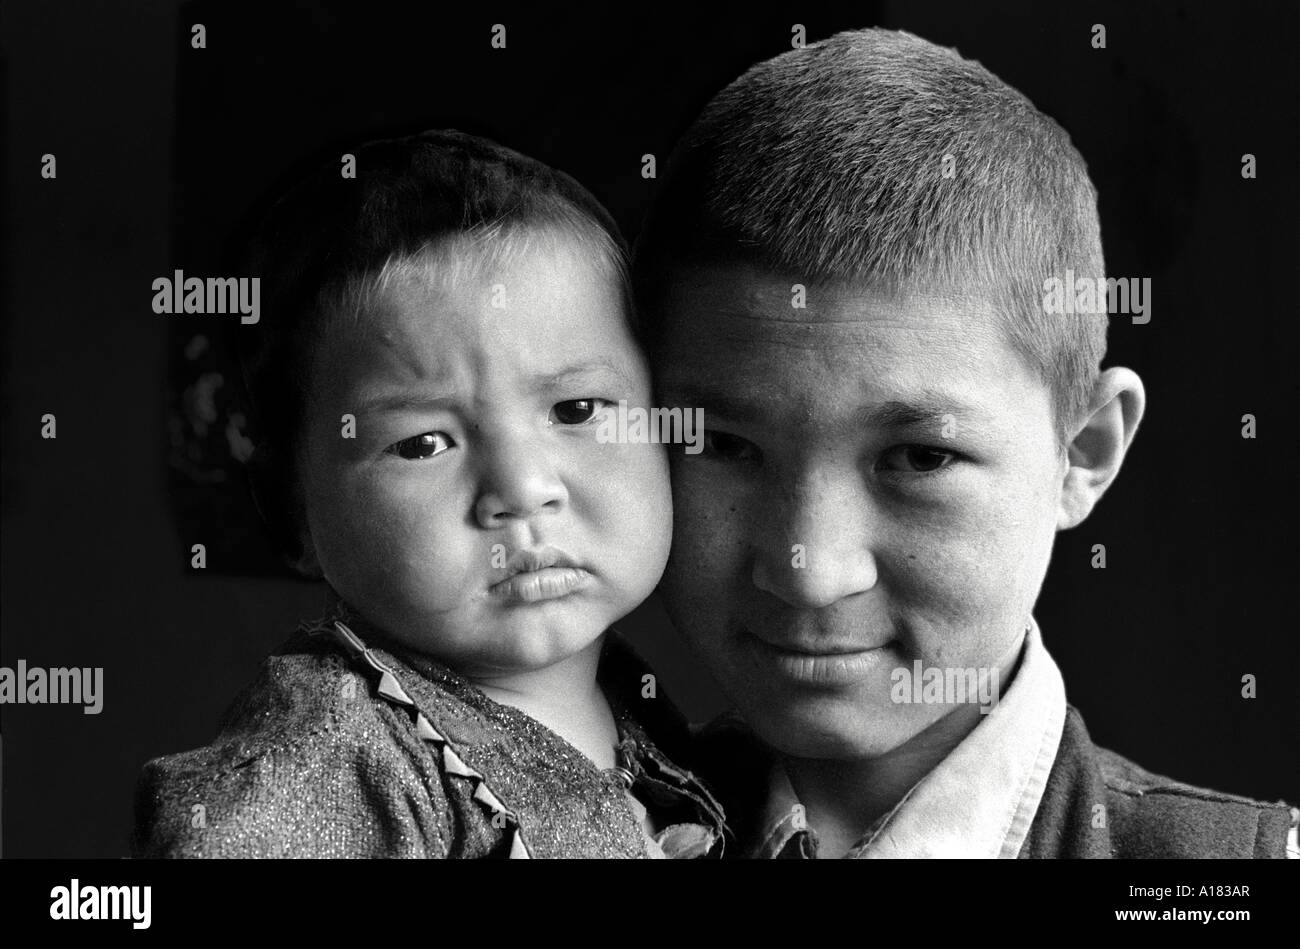 B/W close-up portrait of an Afghan boy and his baby sister. Kabul, Afghanistan Stock Photo